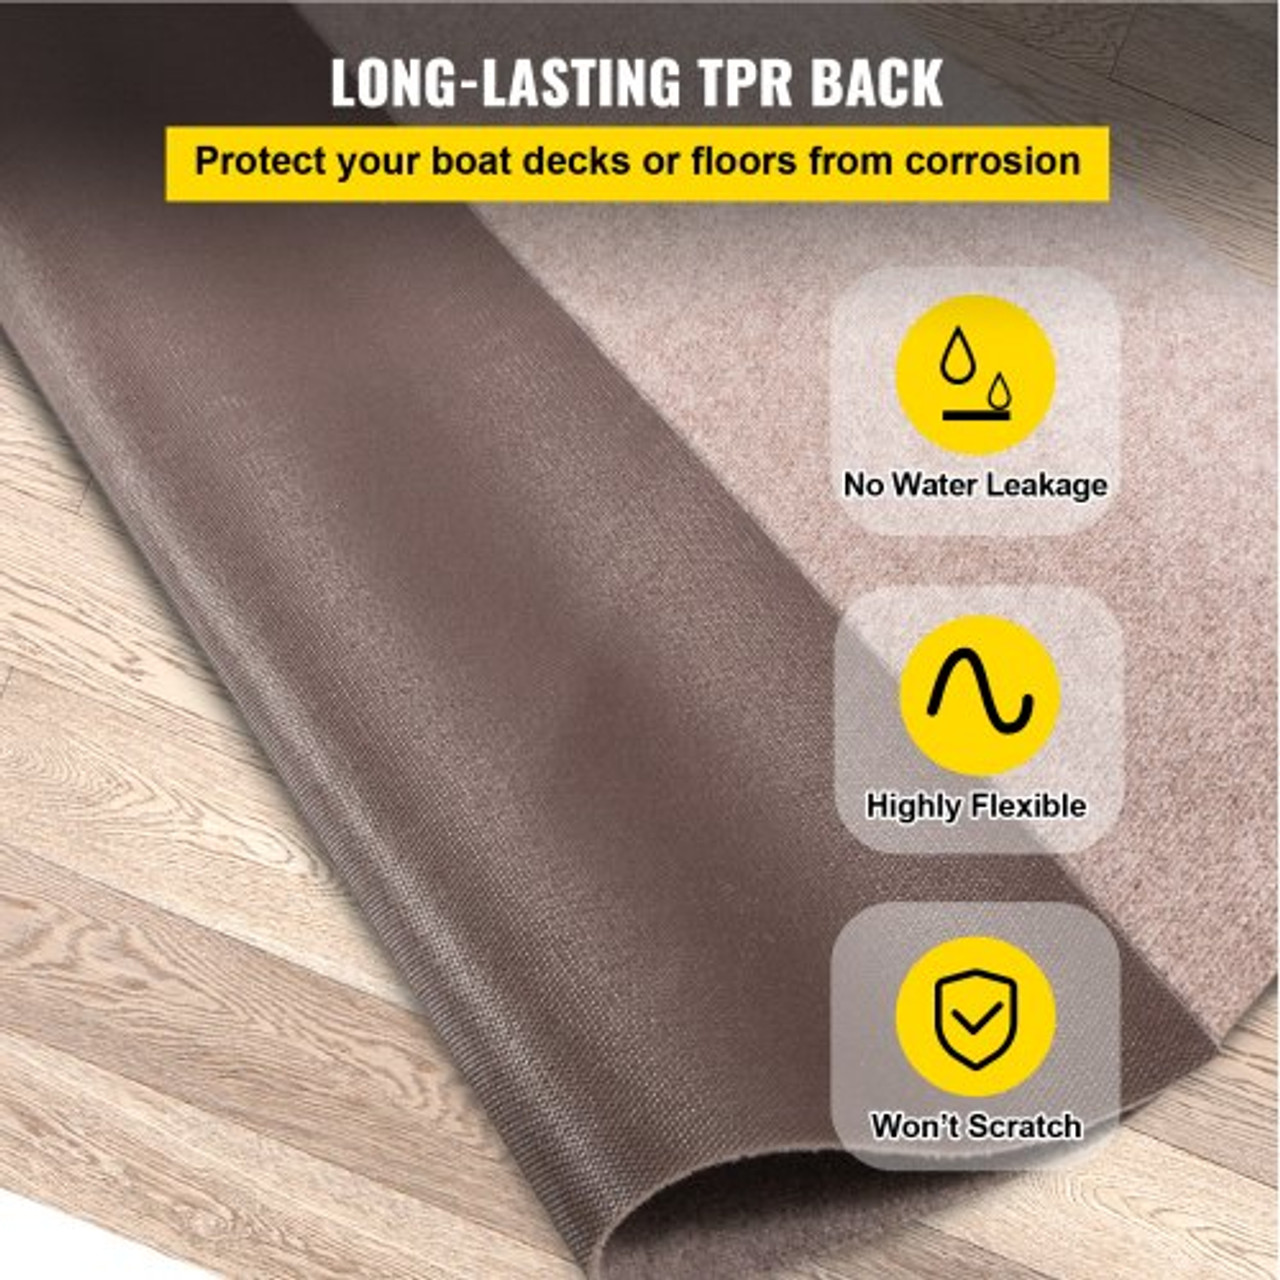 Boat Carpet, 6 ft x 13.1 ft Marine Carpet for Boats, Waterproof Light Brown Carpet with Marine Backing Anti-Slide Marine Grade Boat Carpet Cuttable Easy to Clean Patio Rugs Deck Rug